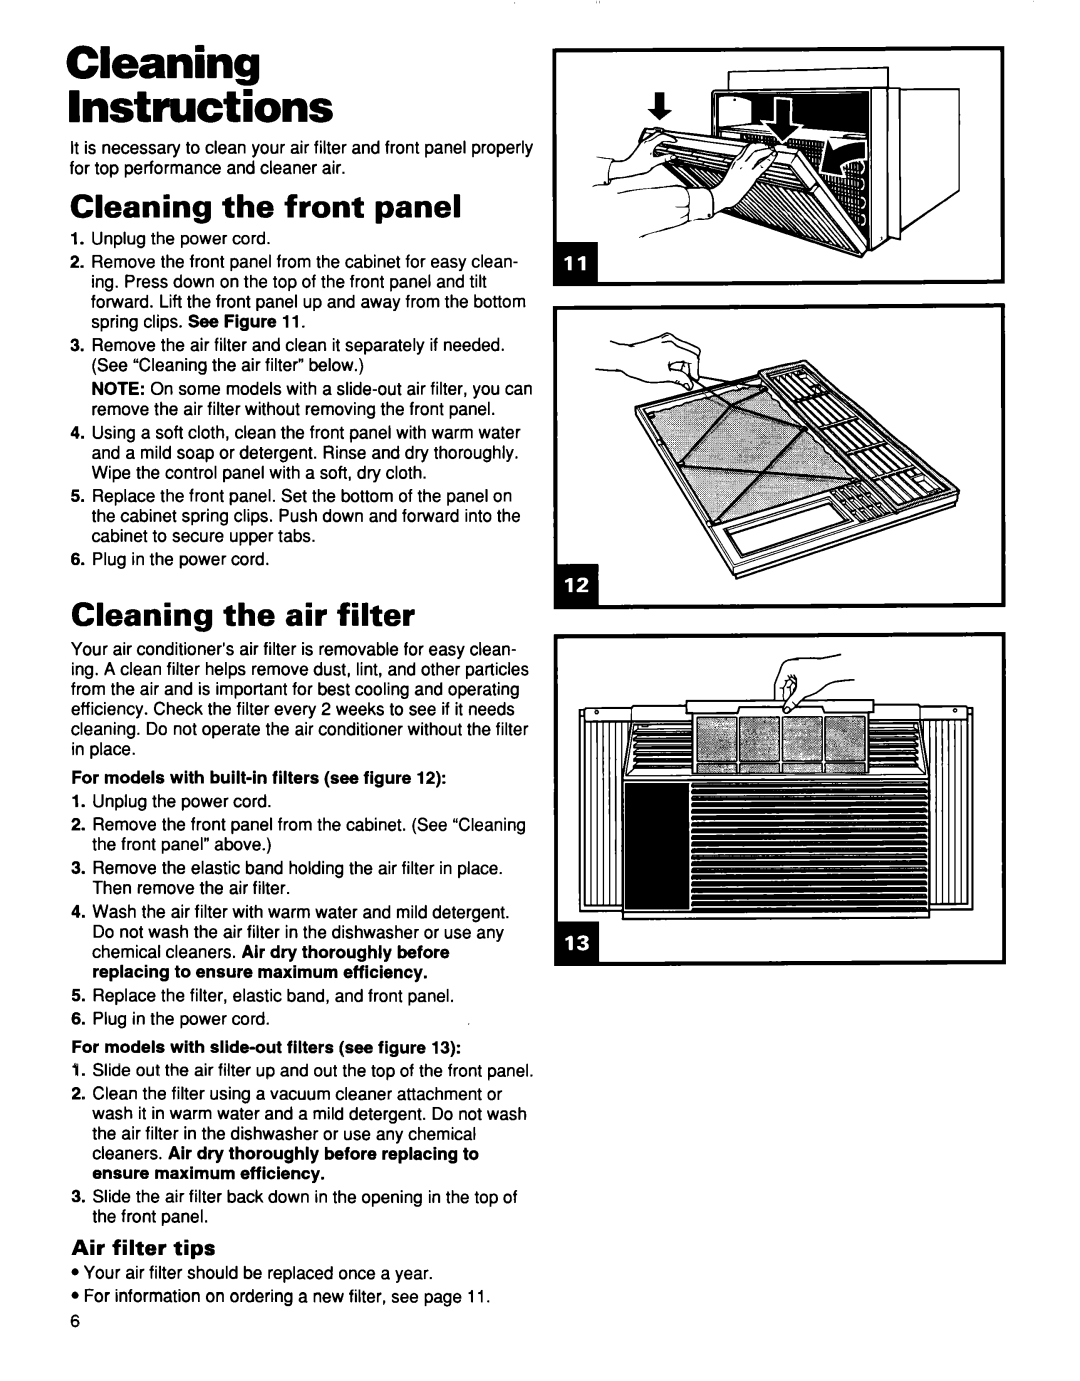 Whirlpool TA07002F0 manual Cleaning the front panel, Cleaning the air filter, Air filter tips, Cleaning Instructions 